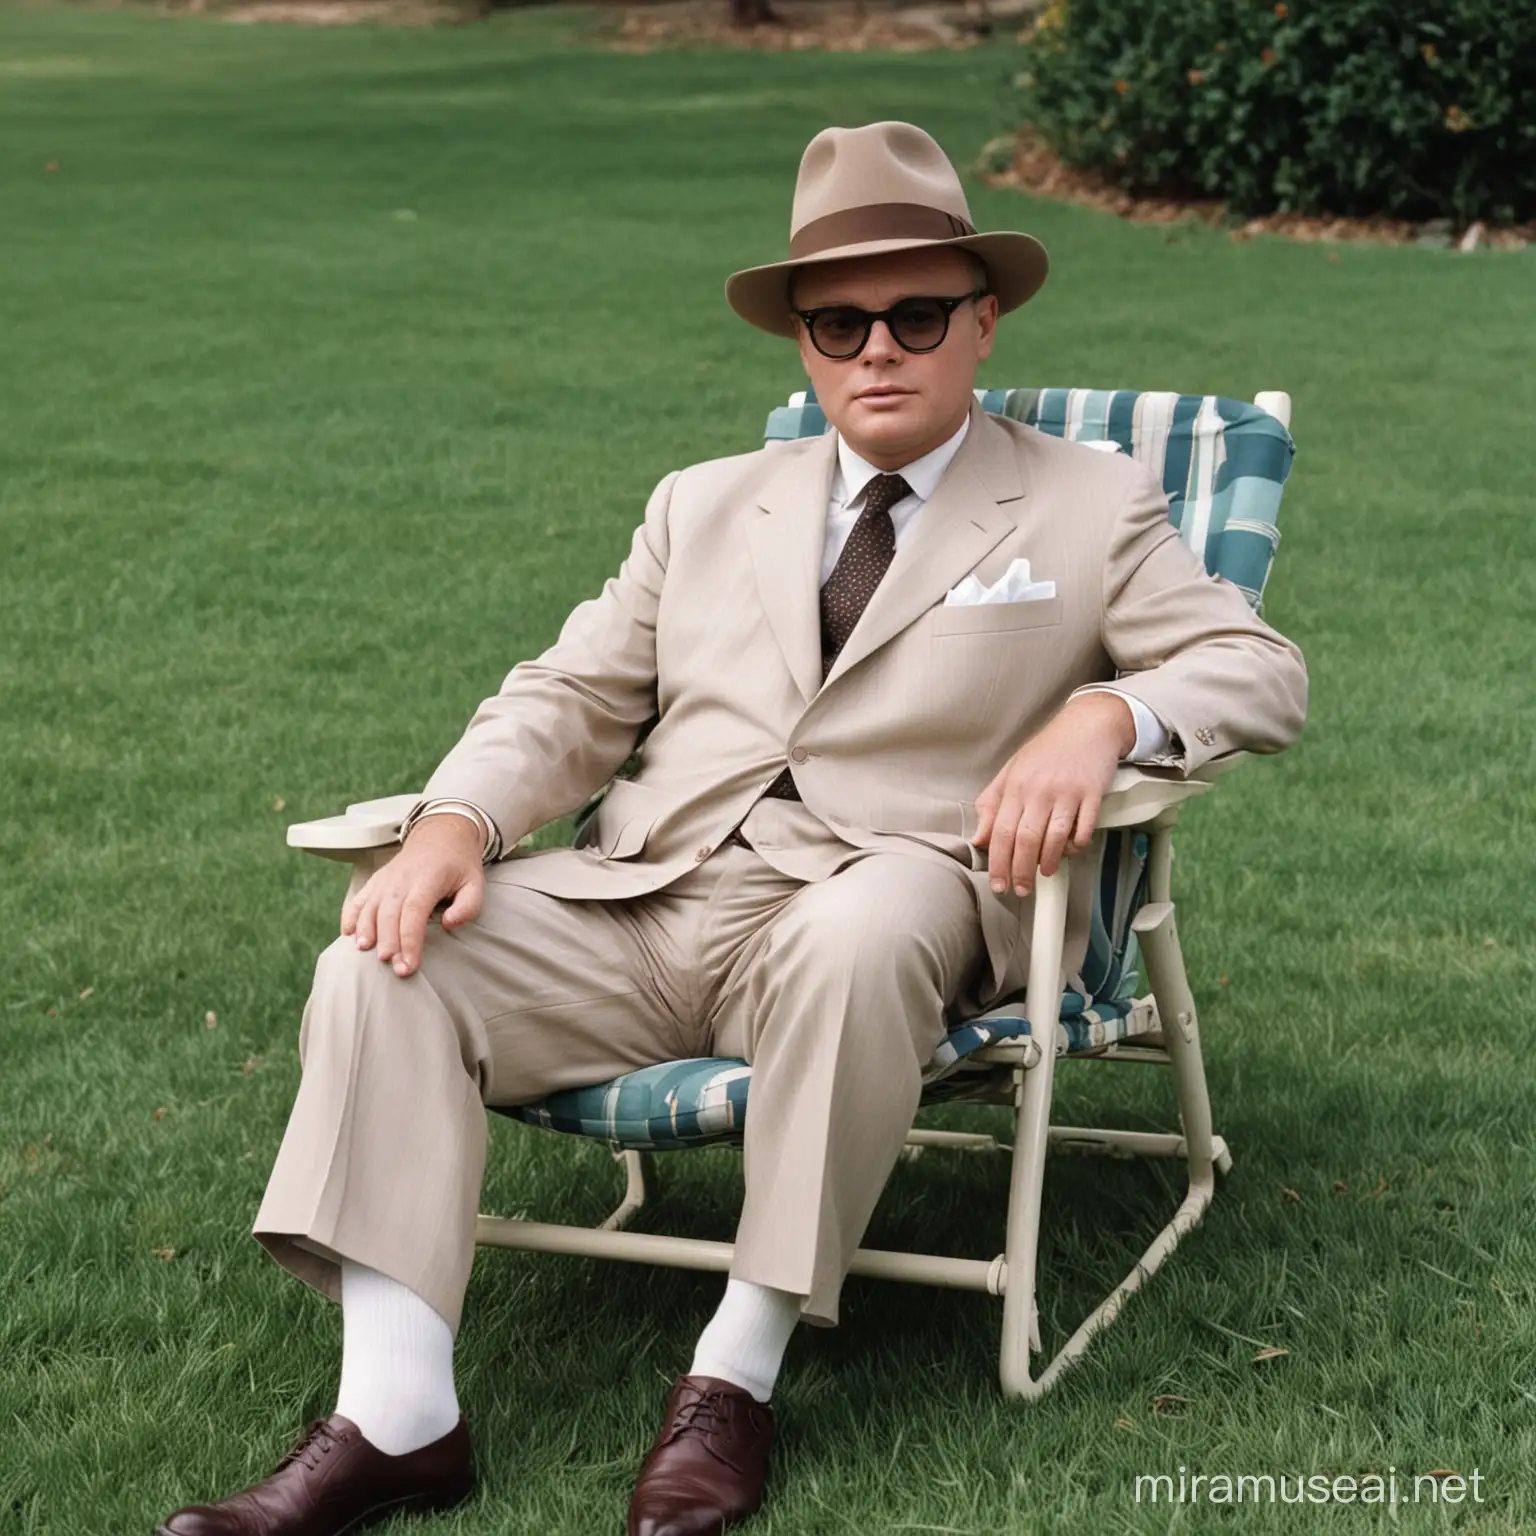 Truman Capote Relaxing in a Colorful Suit and Hat on a Lawn Chair